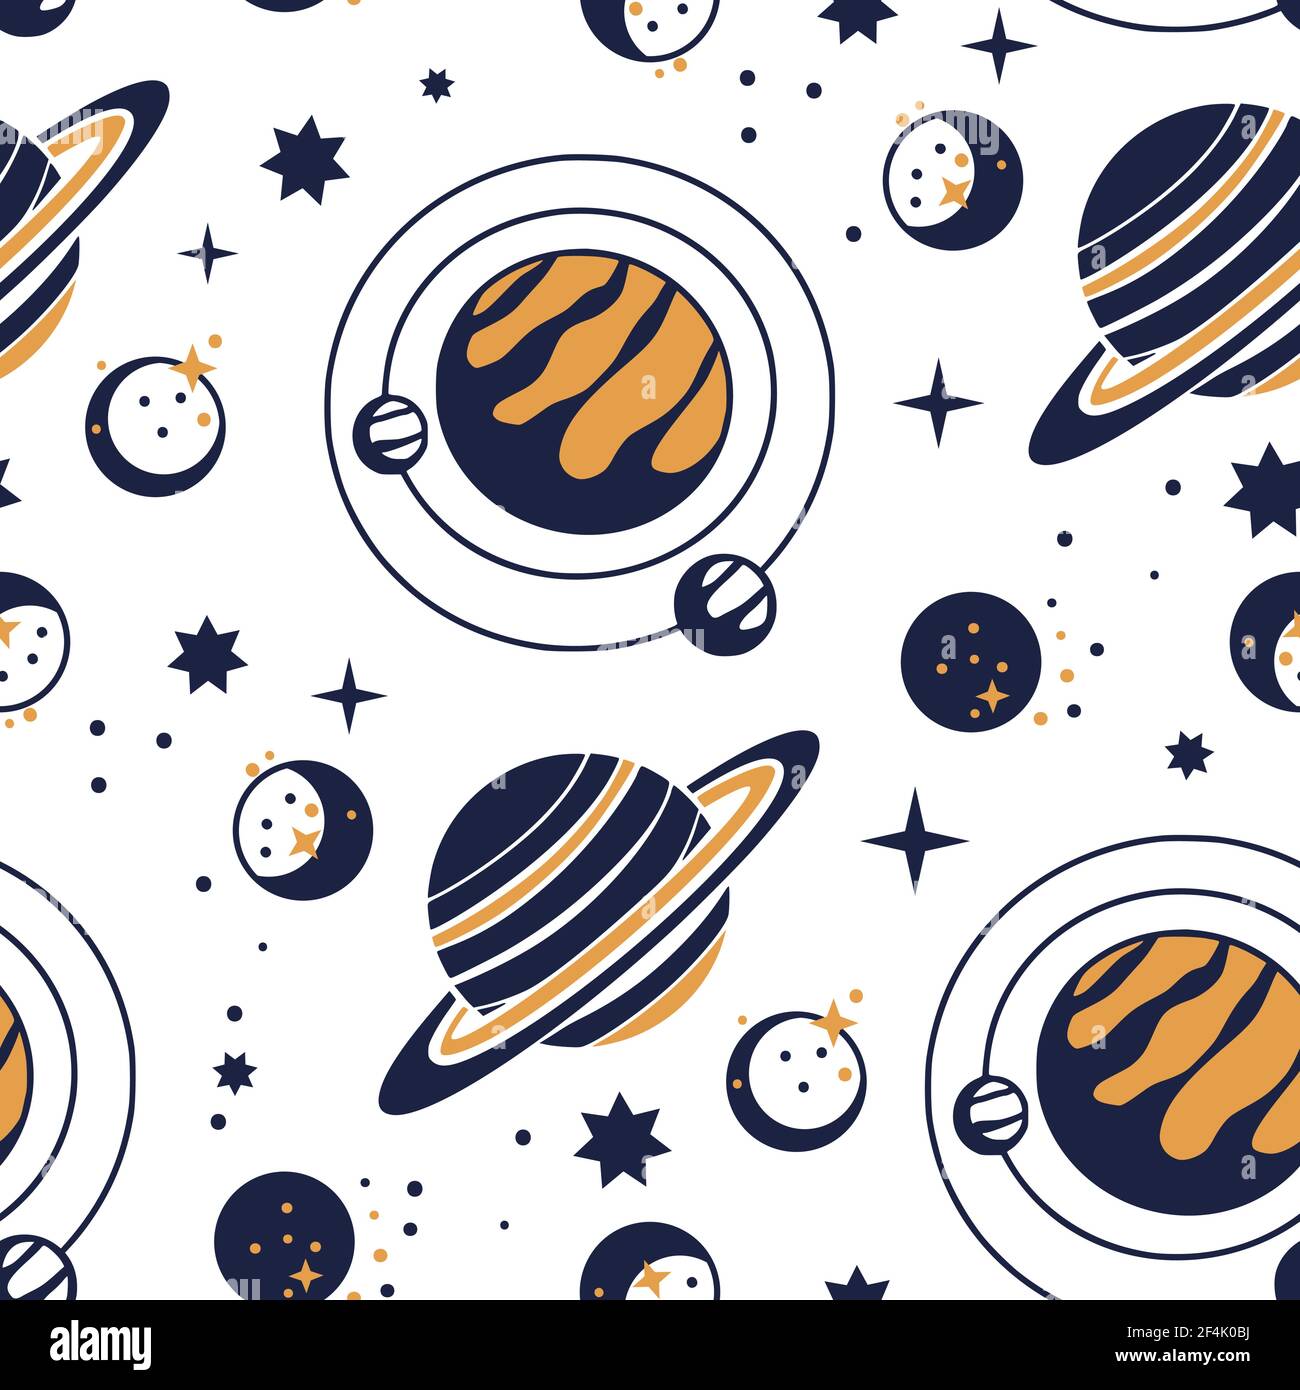 Night celestial star planet moon vector astrology astronomy luxury seamless pattern. Galaxy outer space fantasy futuristic imagination map. Ornate elegance art Stock Vector